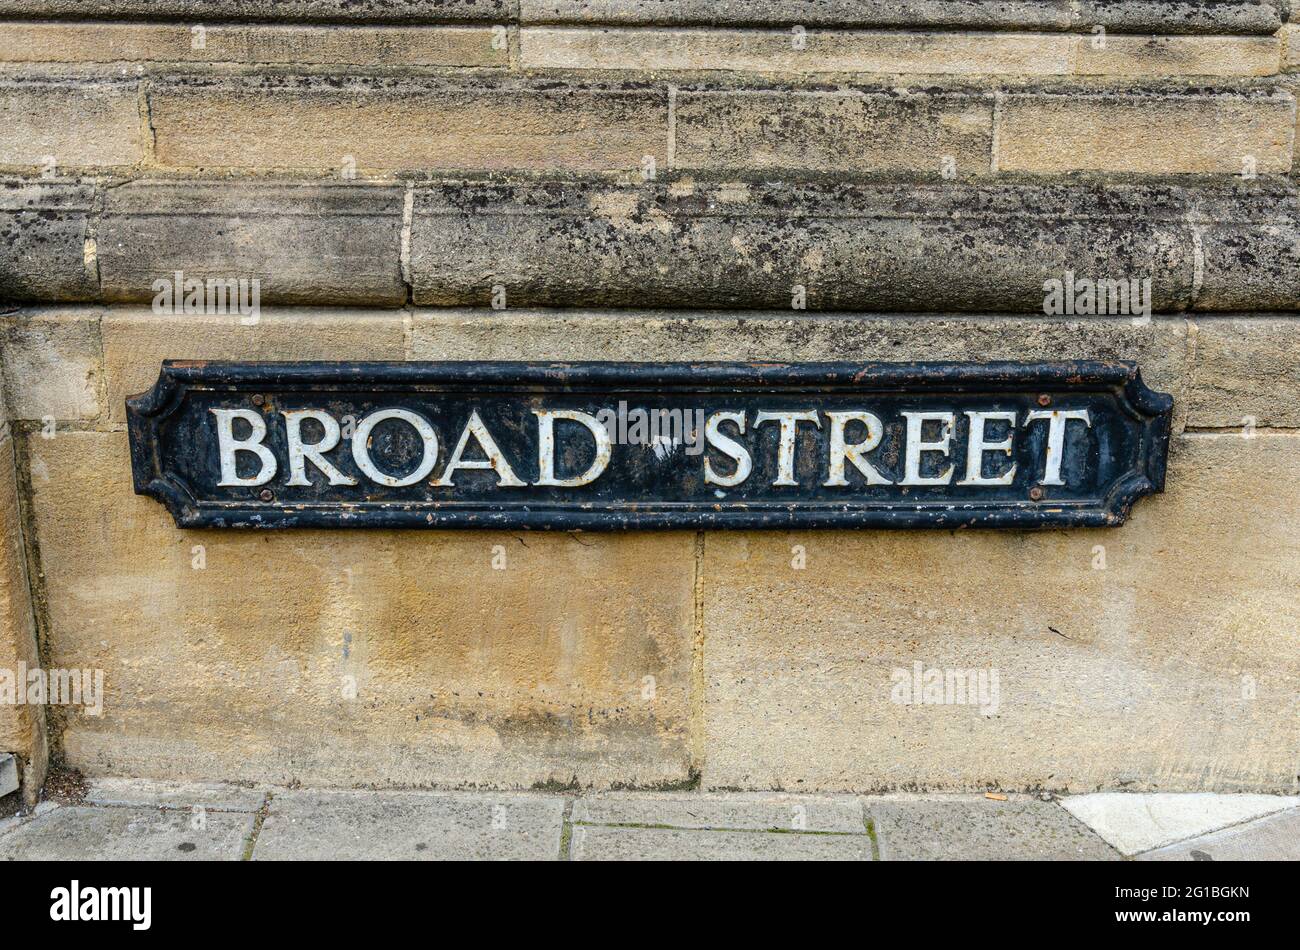 A street name sign on a yellow sandstone built wall for Broad Street in Oxford, UK Stock Photo